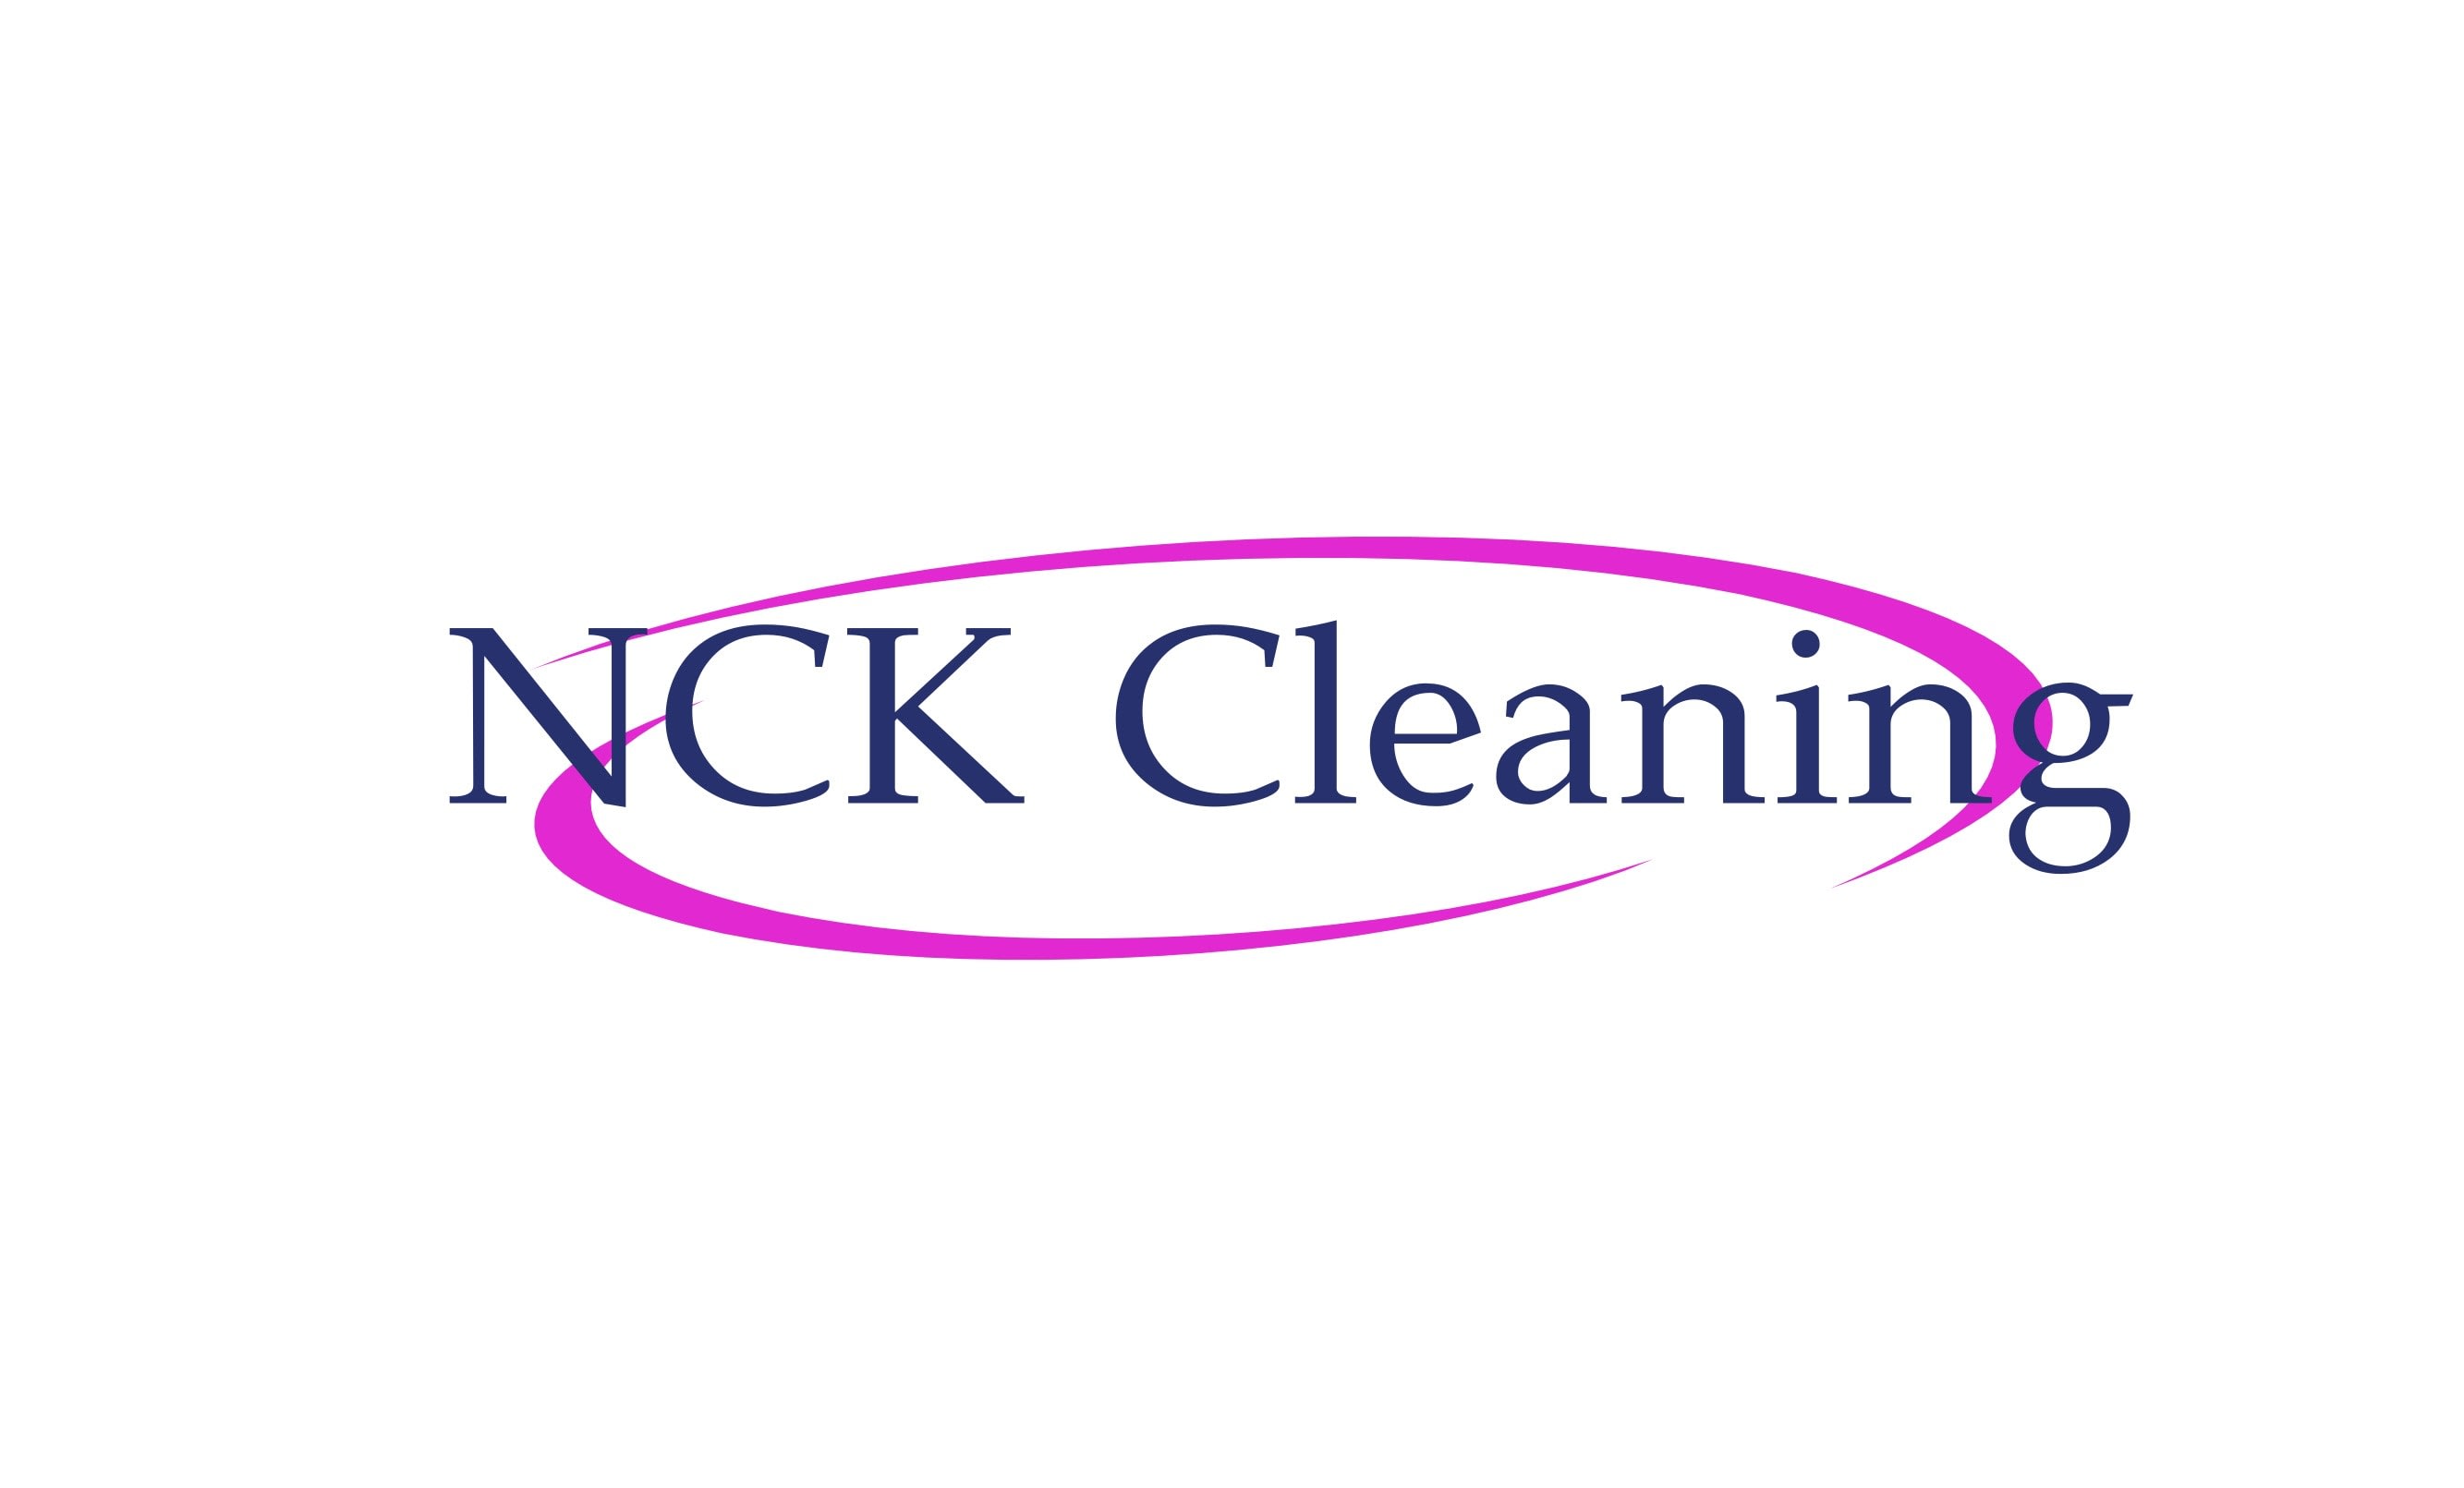 NCK Cleaning